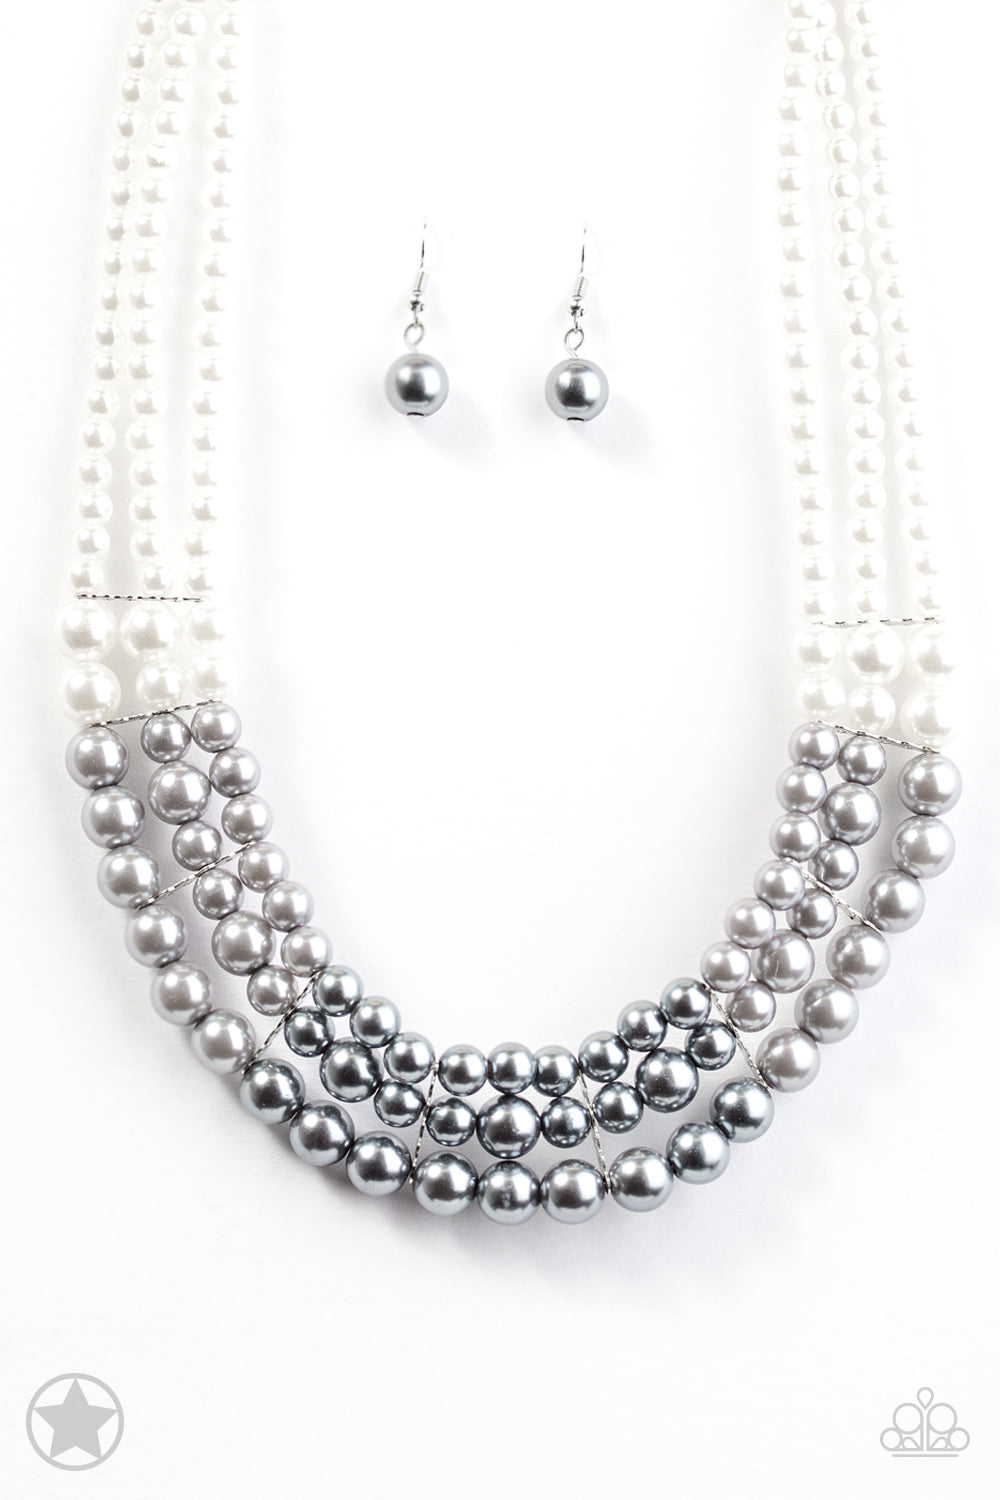 Lady In Waiting - White Silver Paparazzi Necklace Blockbuster